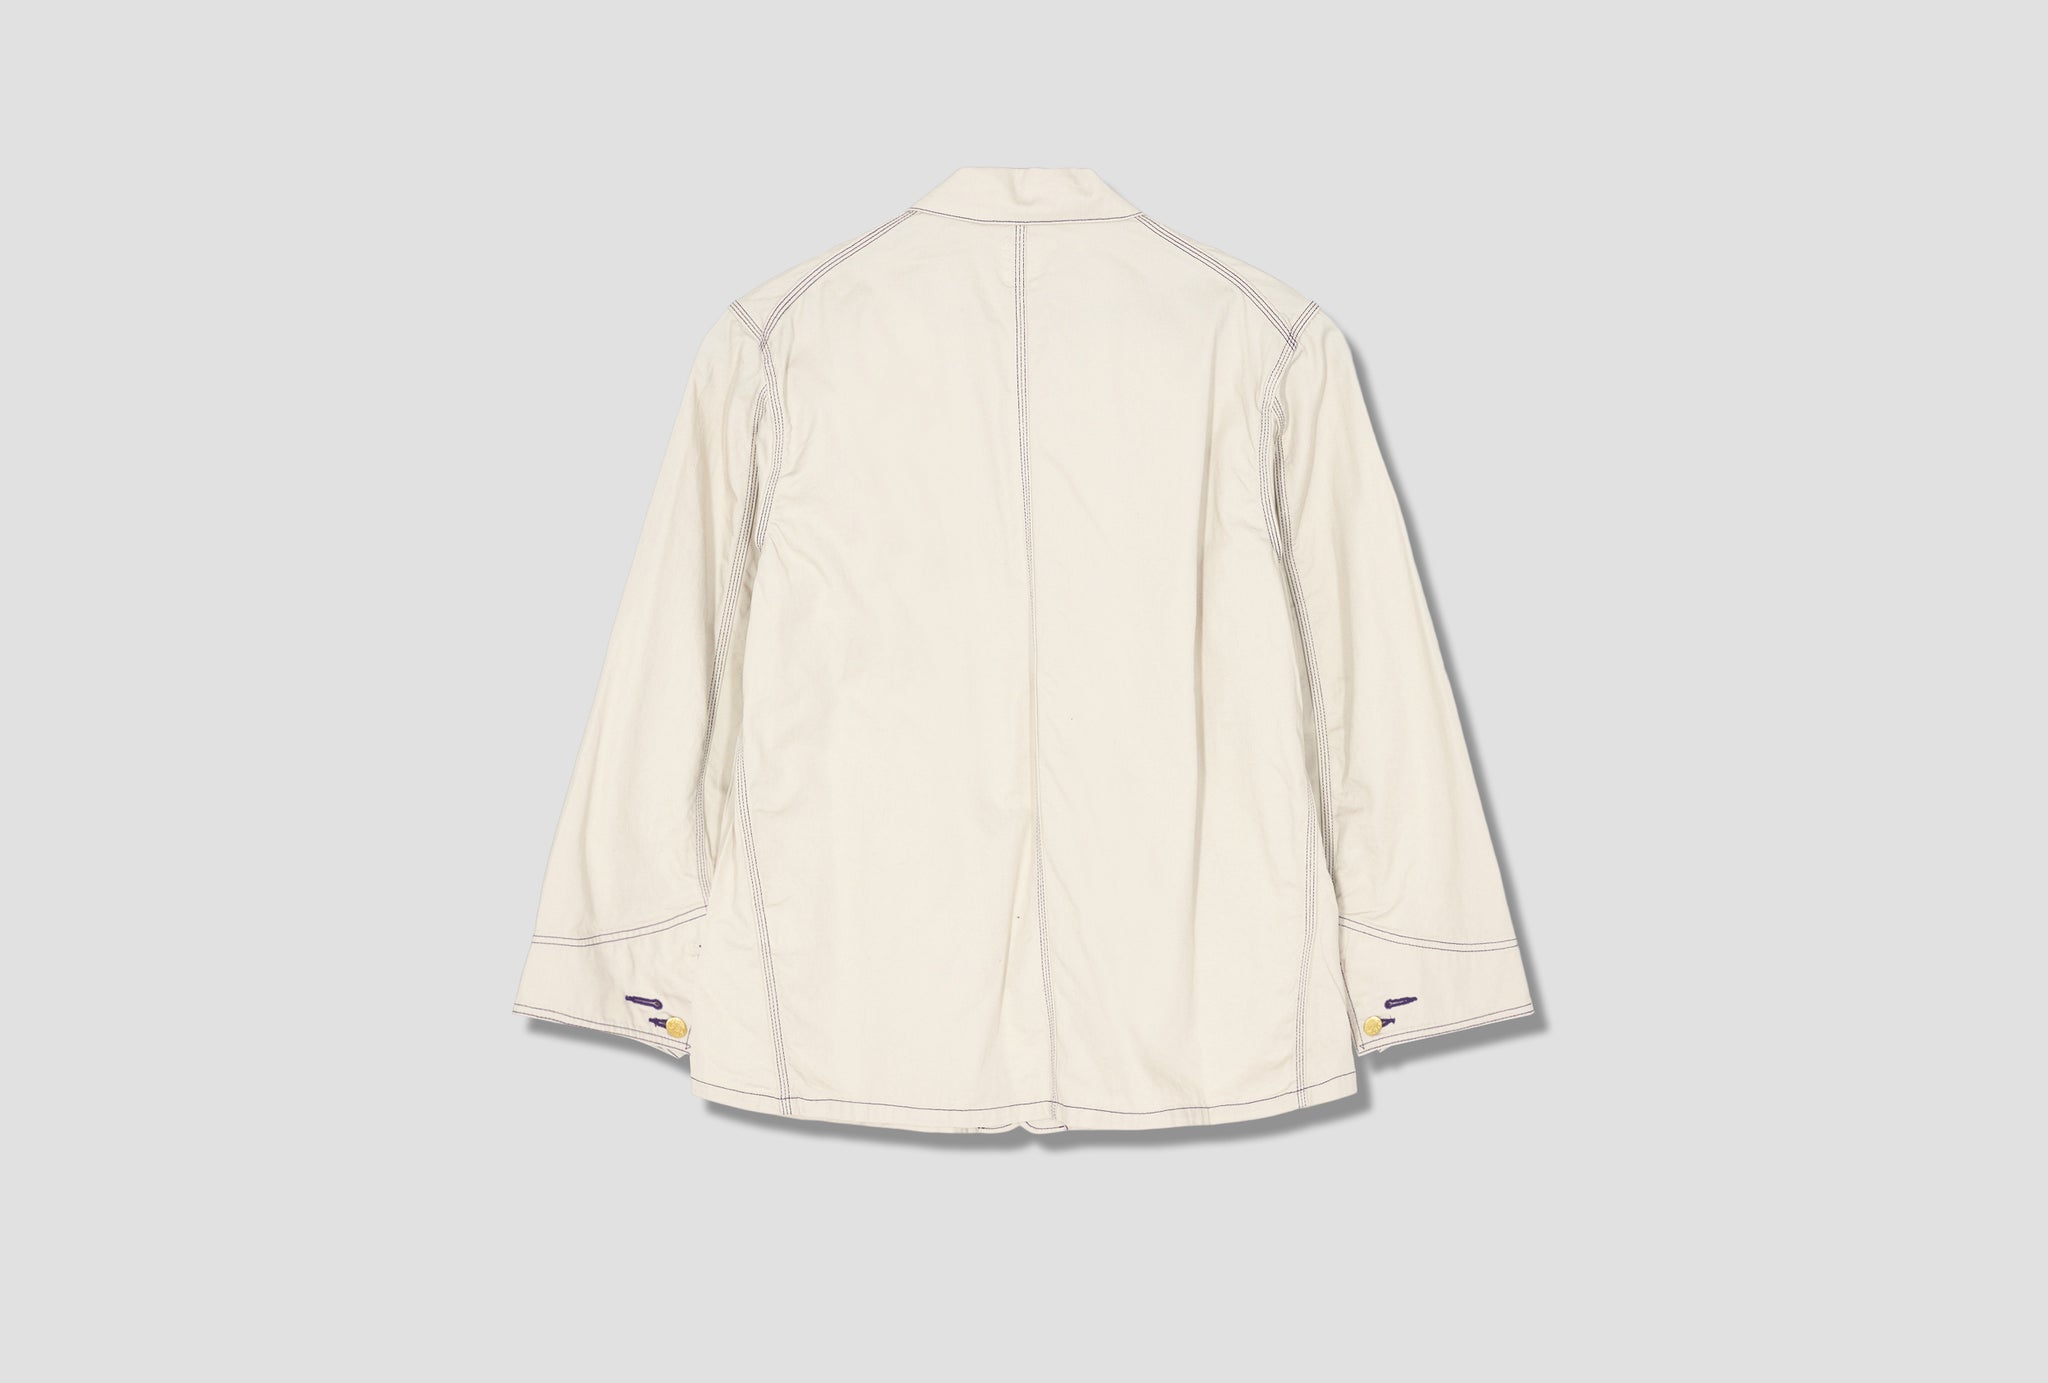 NEEDLES X SMITH'S COVERALL - COTTON TWILL KP285 Beige